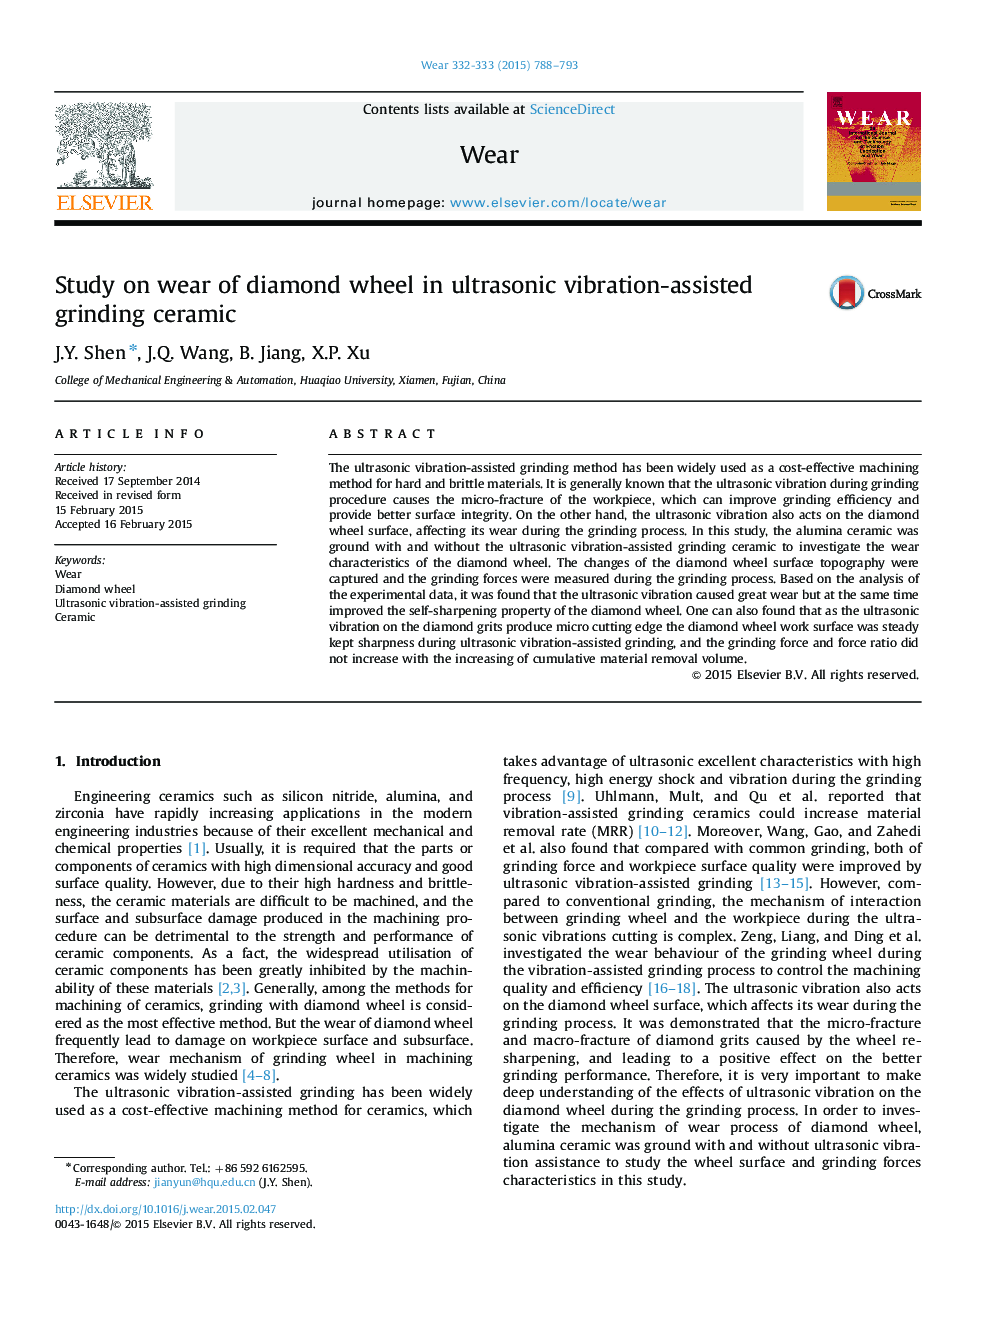 Study on wear of diamond wheel in ultrasonic vibration-assisted grinding ceramic